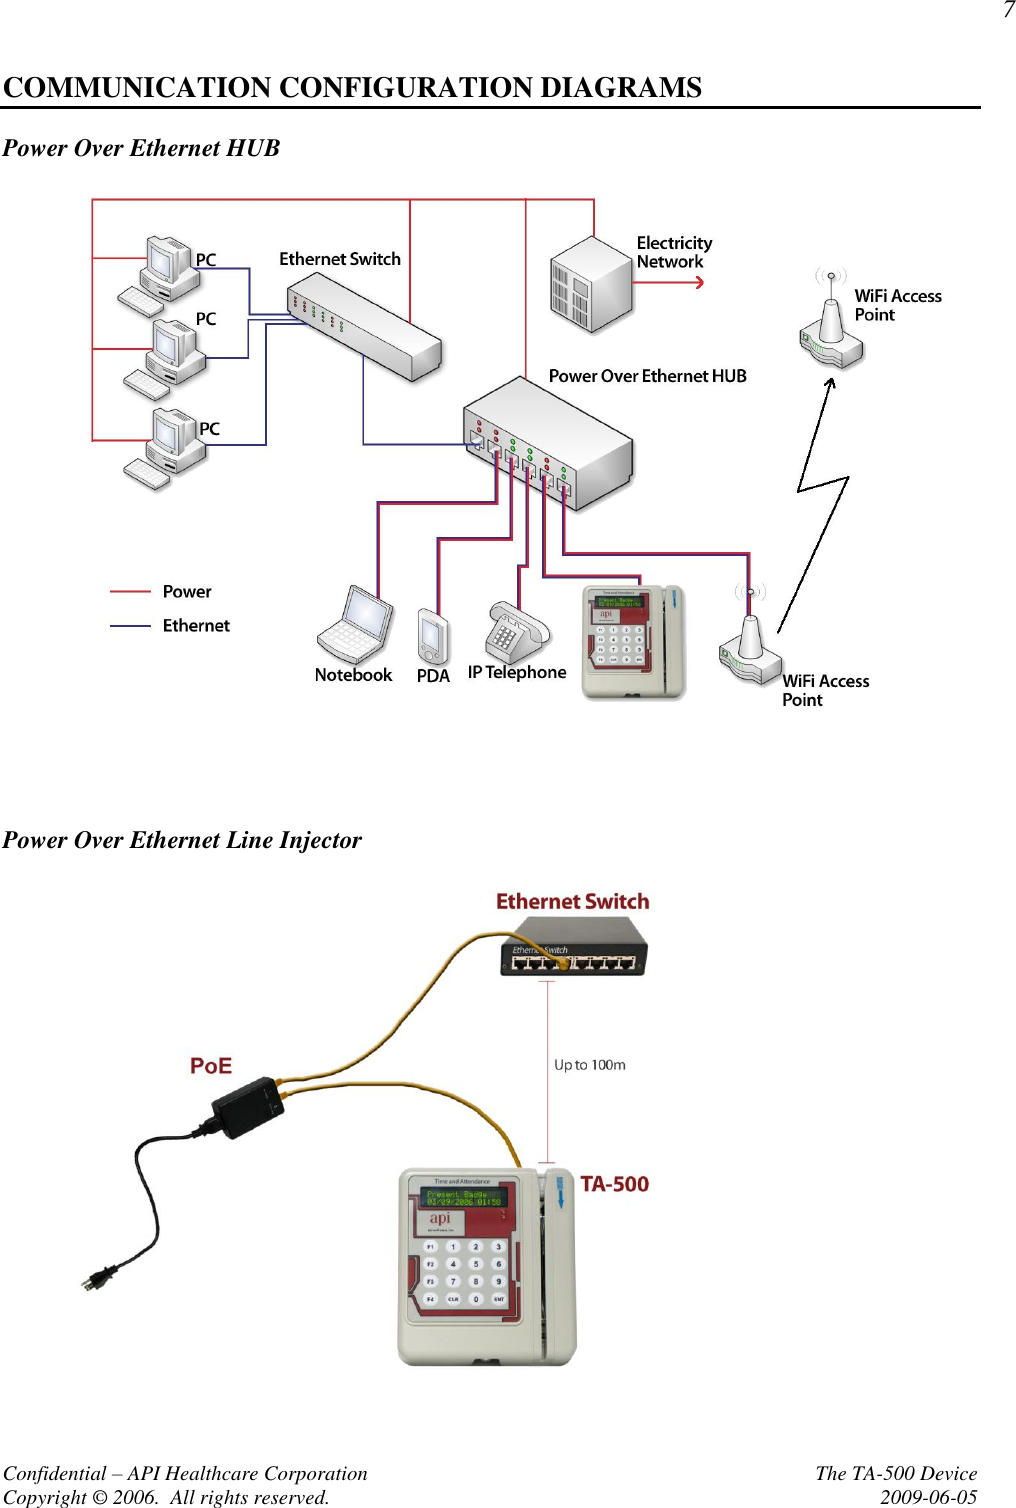 7 Confidential – API Healthcare Corporation    The TA-500 Device Copyright © 2006.  All rights reserved.  2009-06-05 COMMUNICATION CONFIGURATION DIAGRAMS Power Over Ethernet HUB       Power Over Ethernet Line Injector    